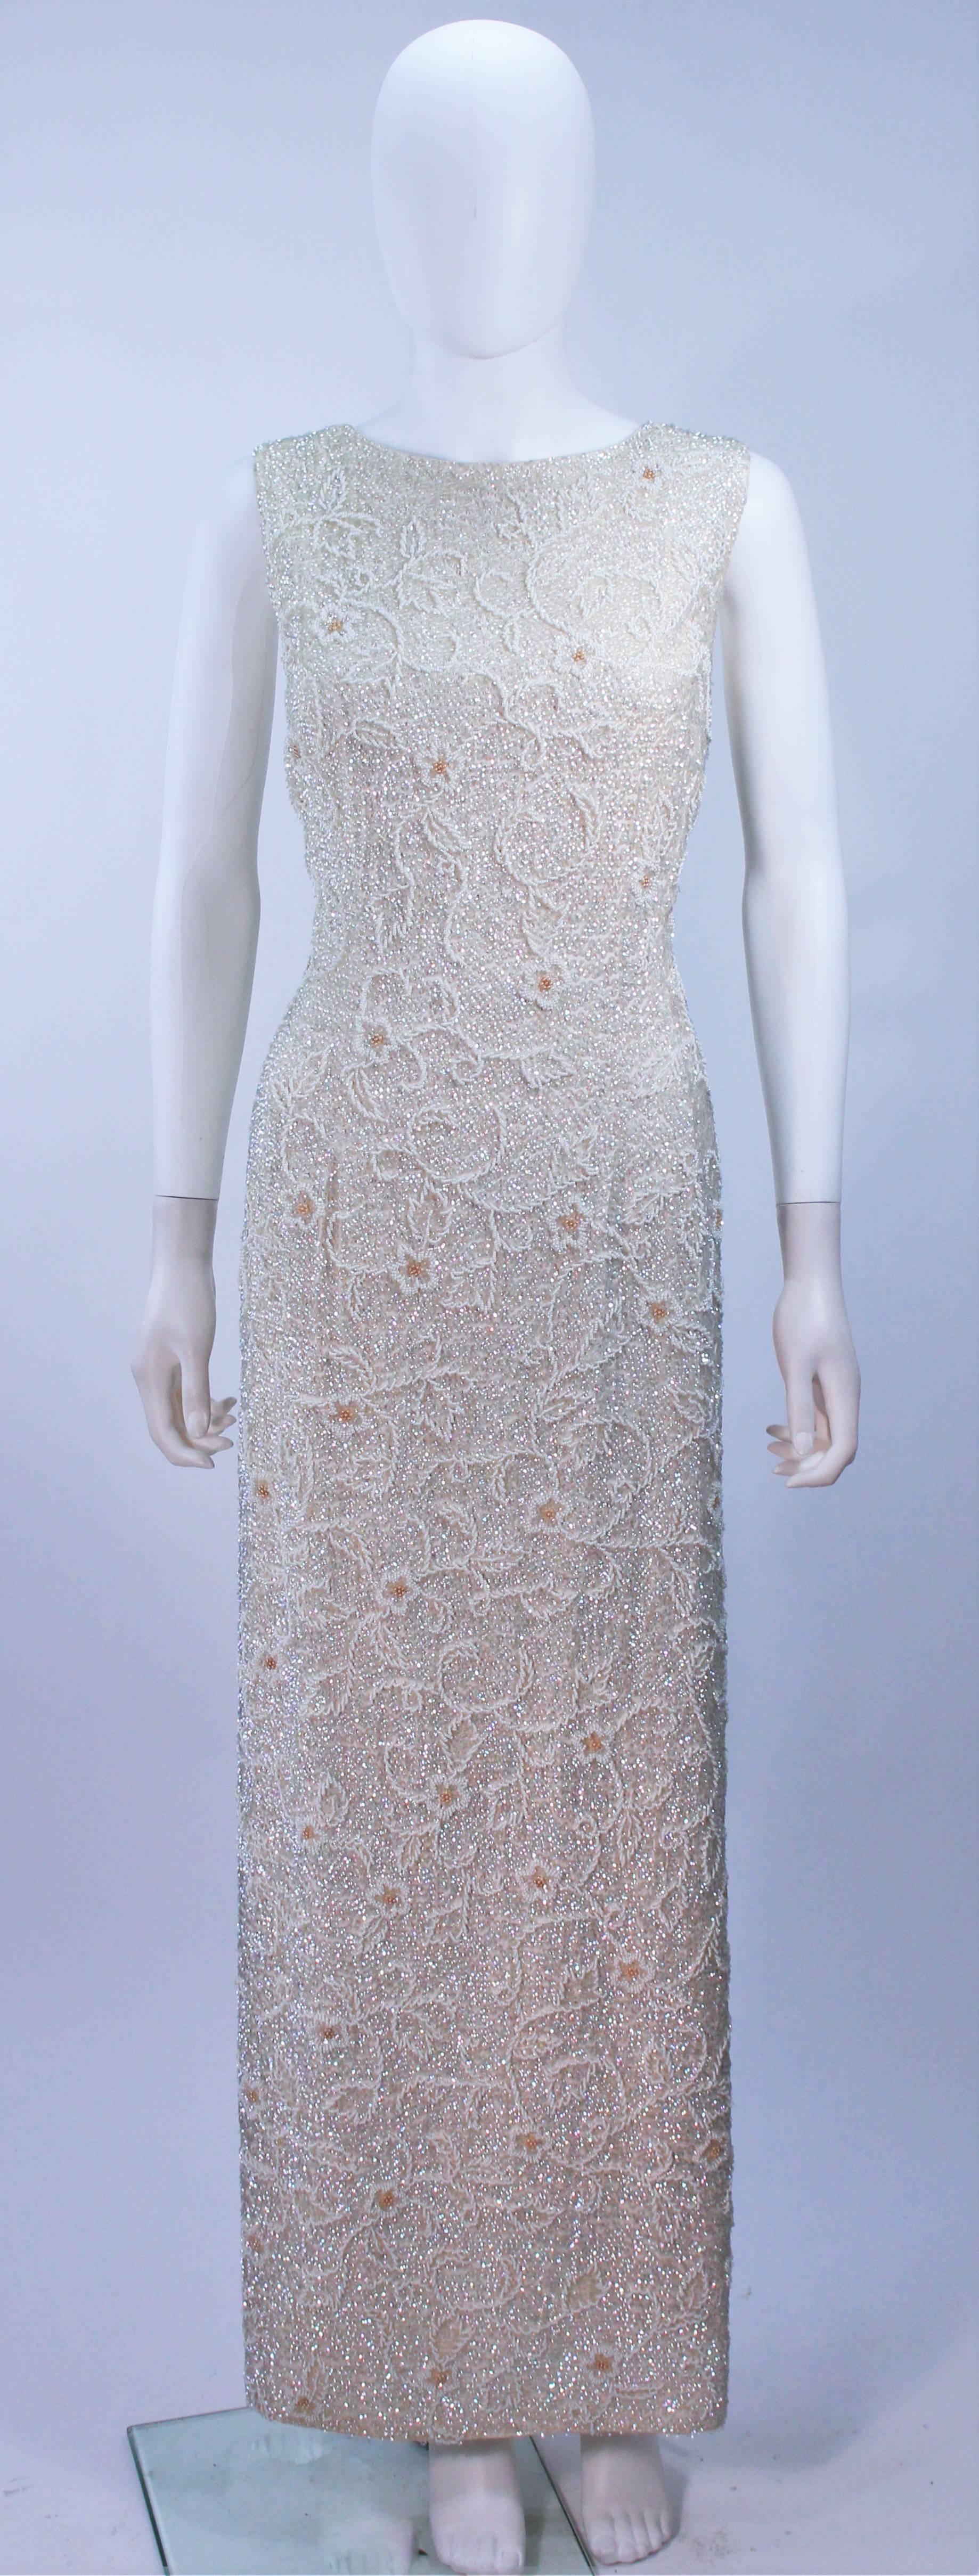  This gown is composed of an off white iridescent beaded and sequin fabric, with a floral pattern. There is a center back zipper closure. In excellent vintage condition. 

  **Please cross-reference measurements for personal accuracy. 

Measures